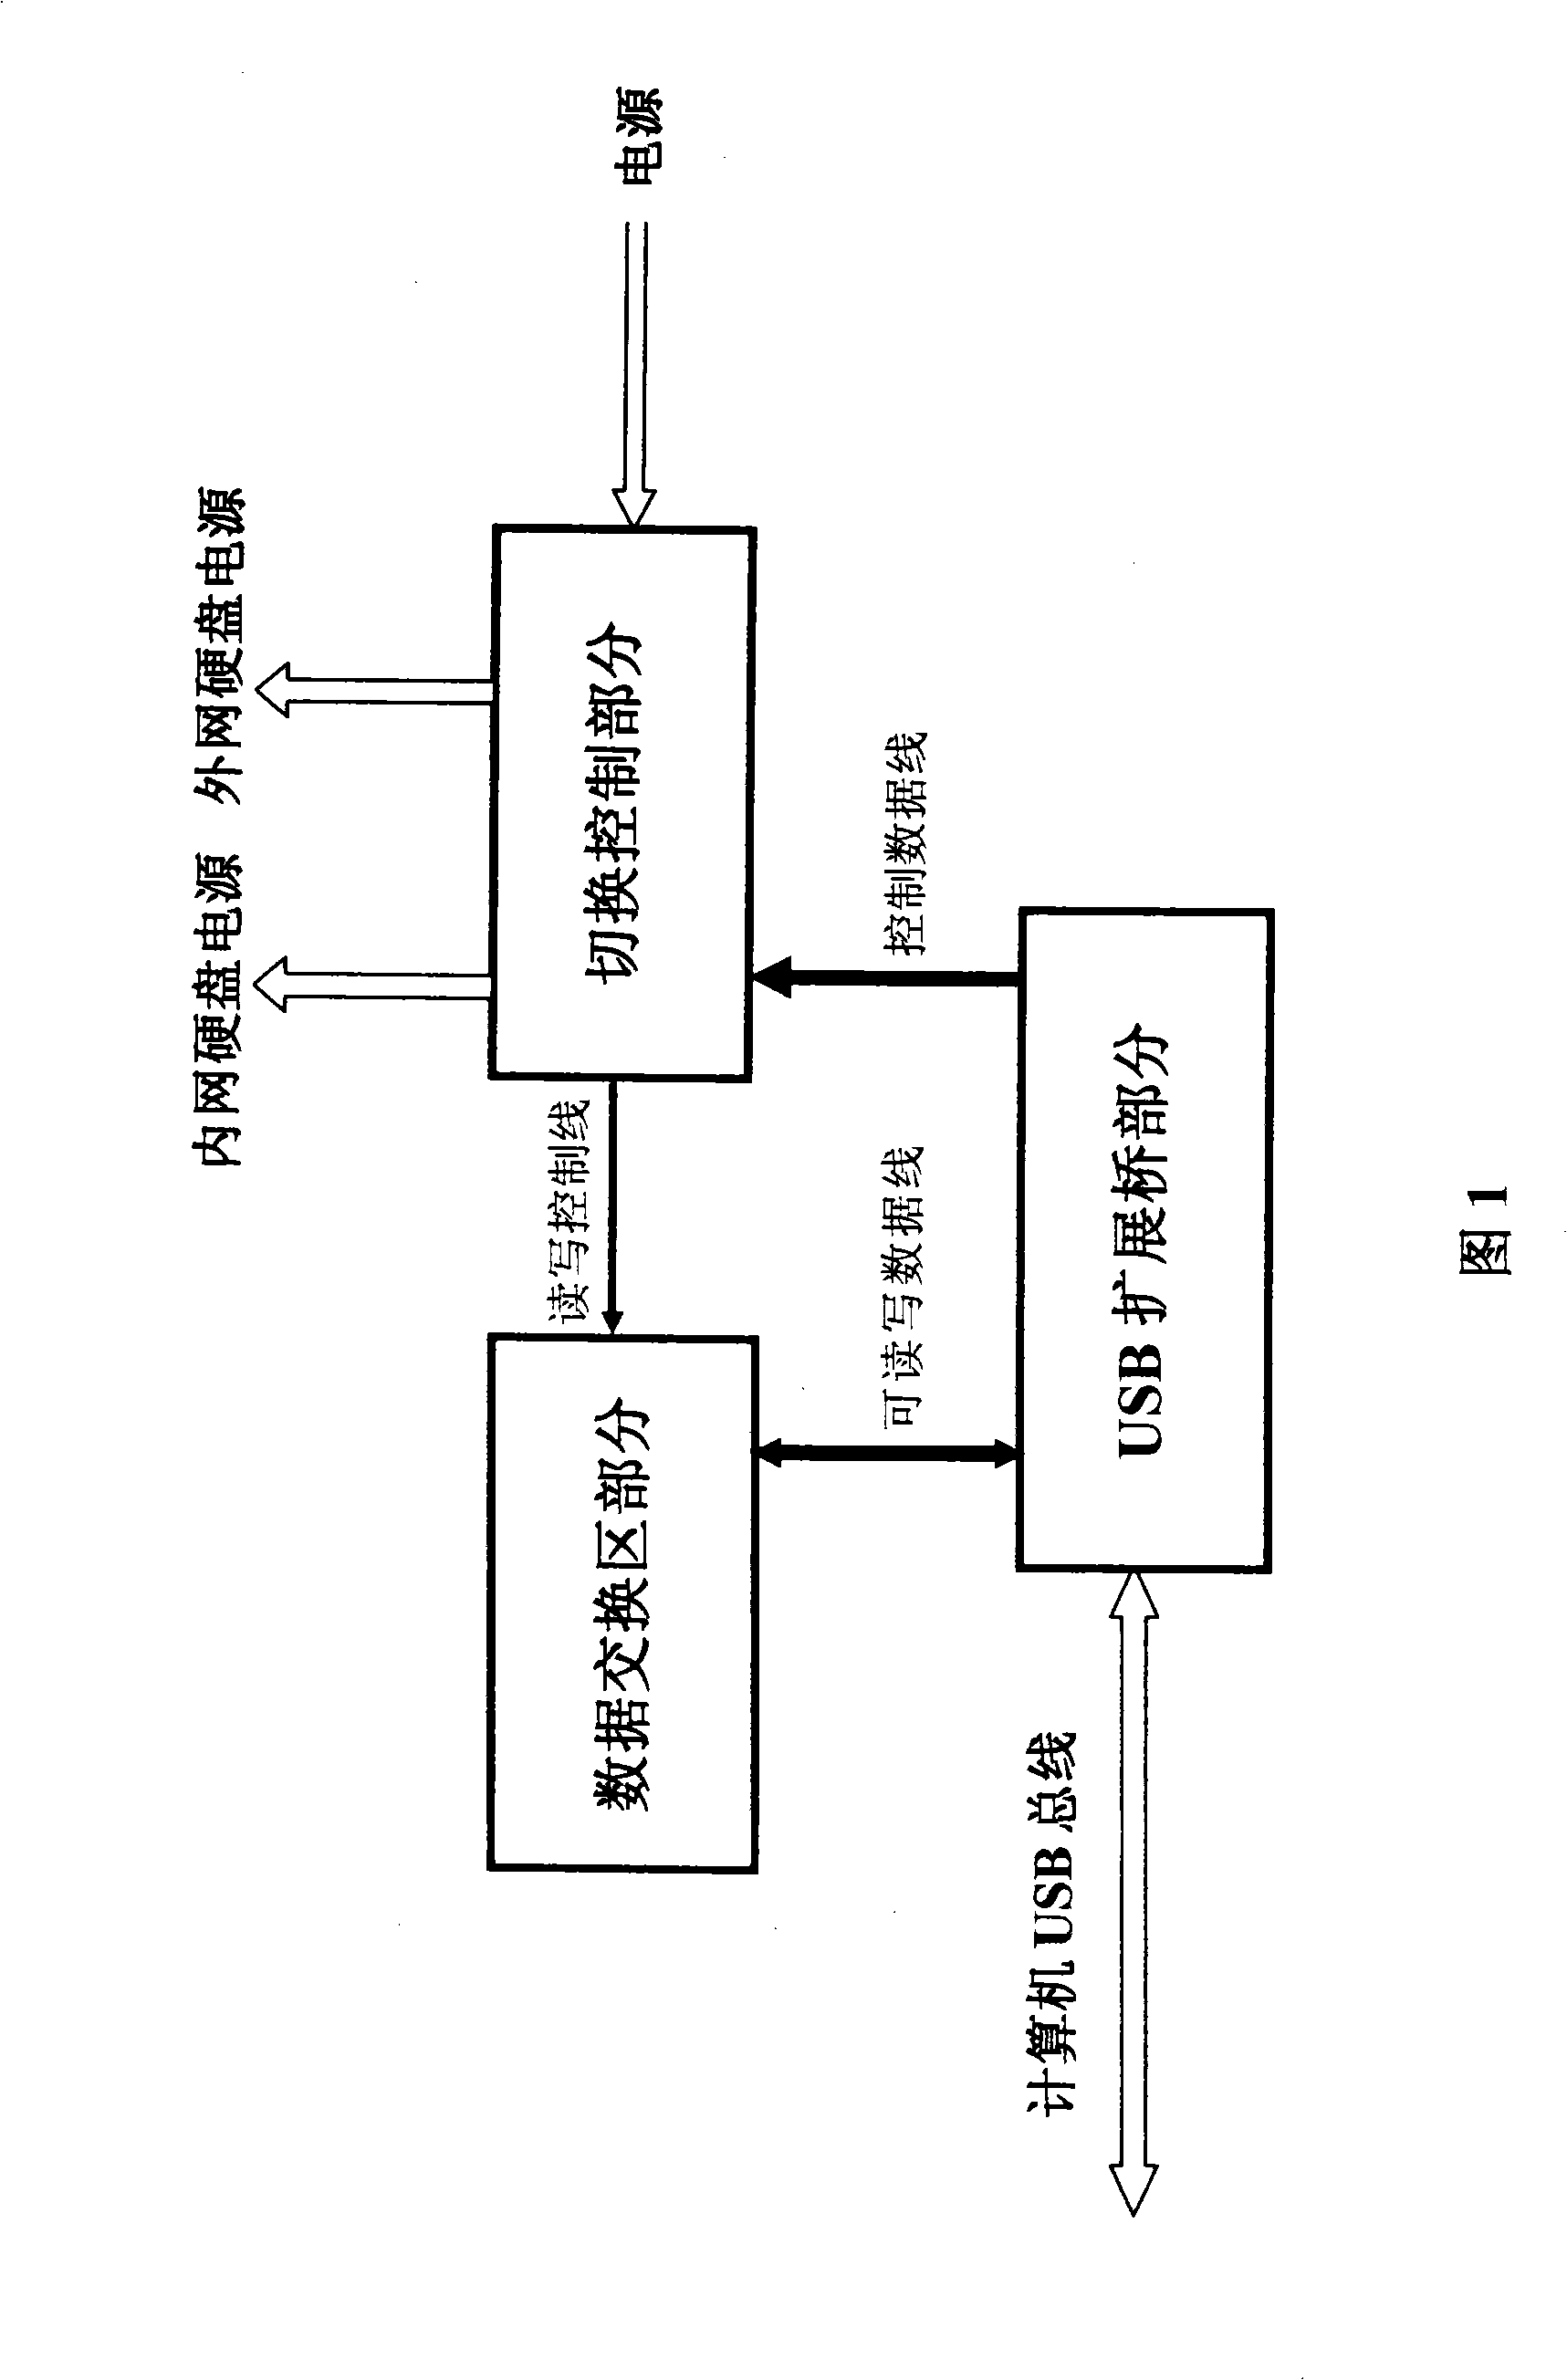 Switching system relating computer inner-external network data safety